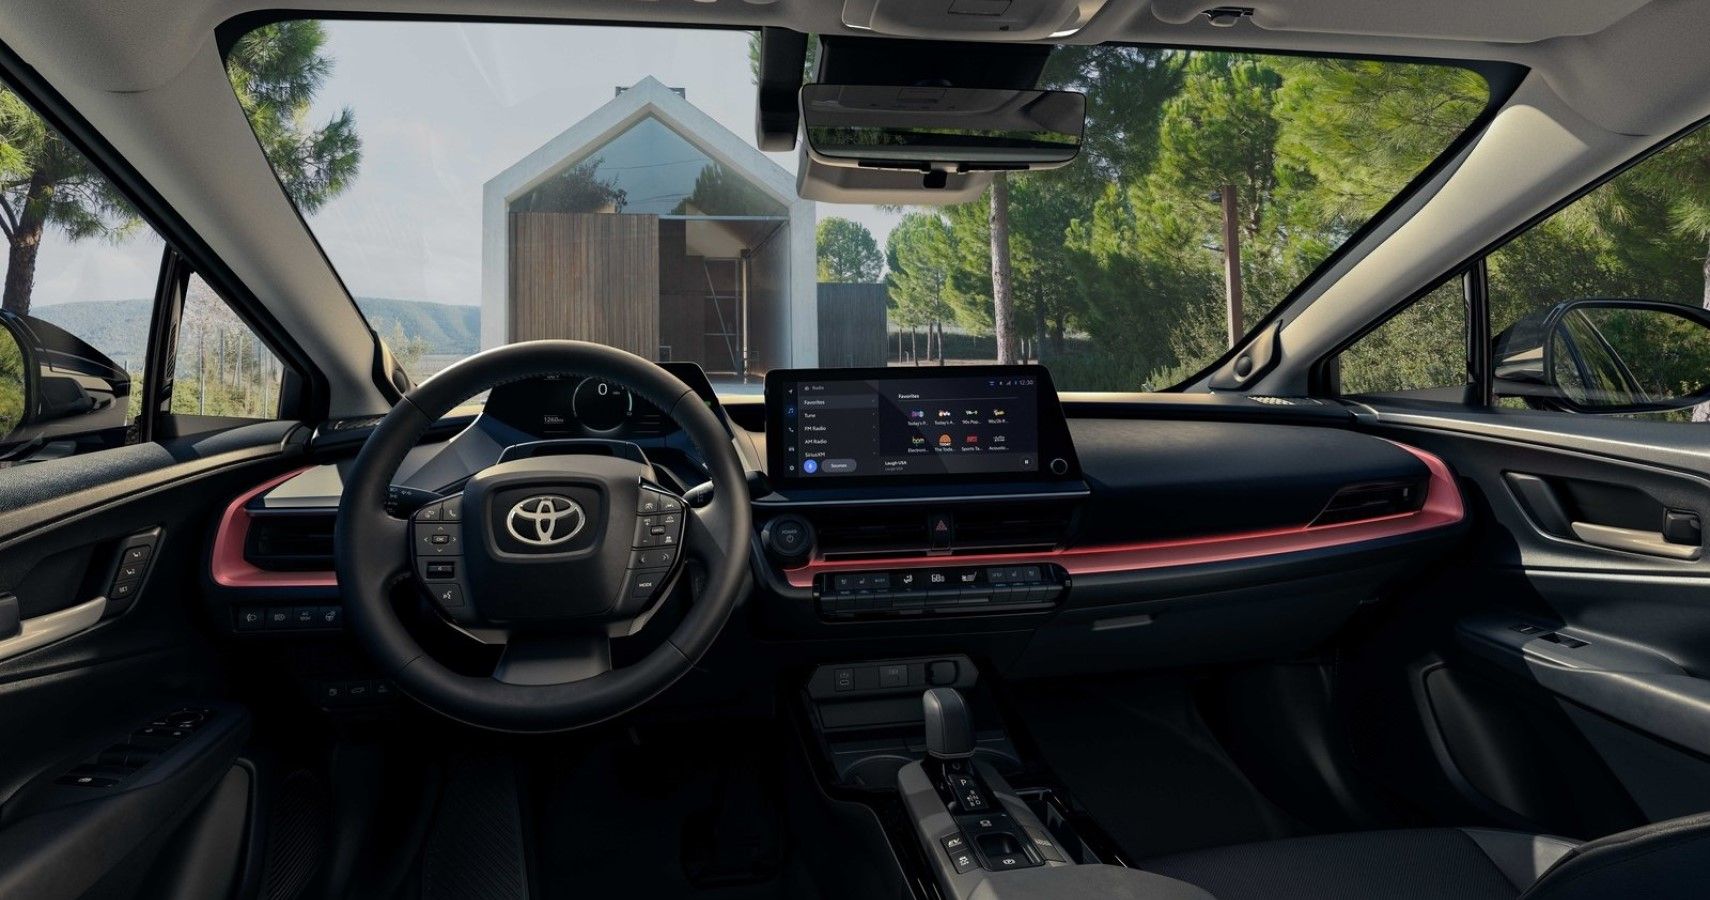 The interior appearance of the 2023 Toyota Prius